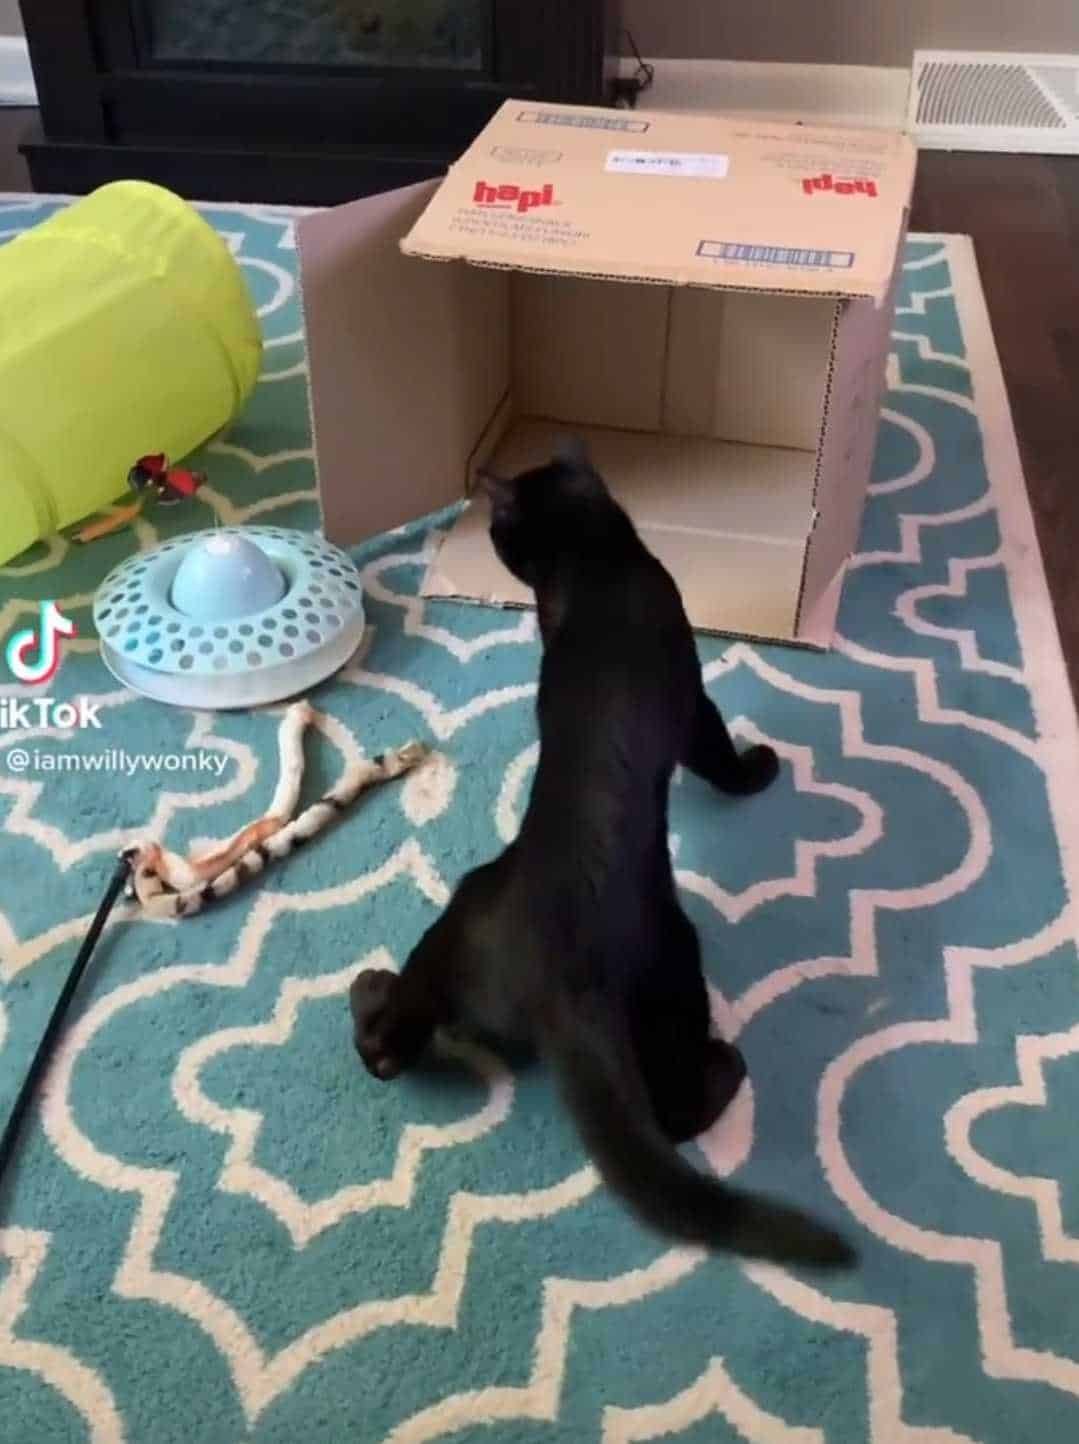 a black cat is playing next to the box